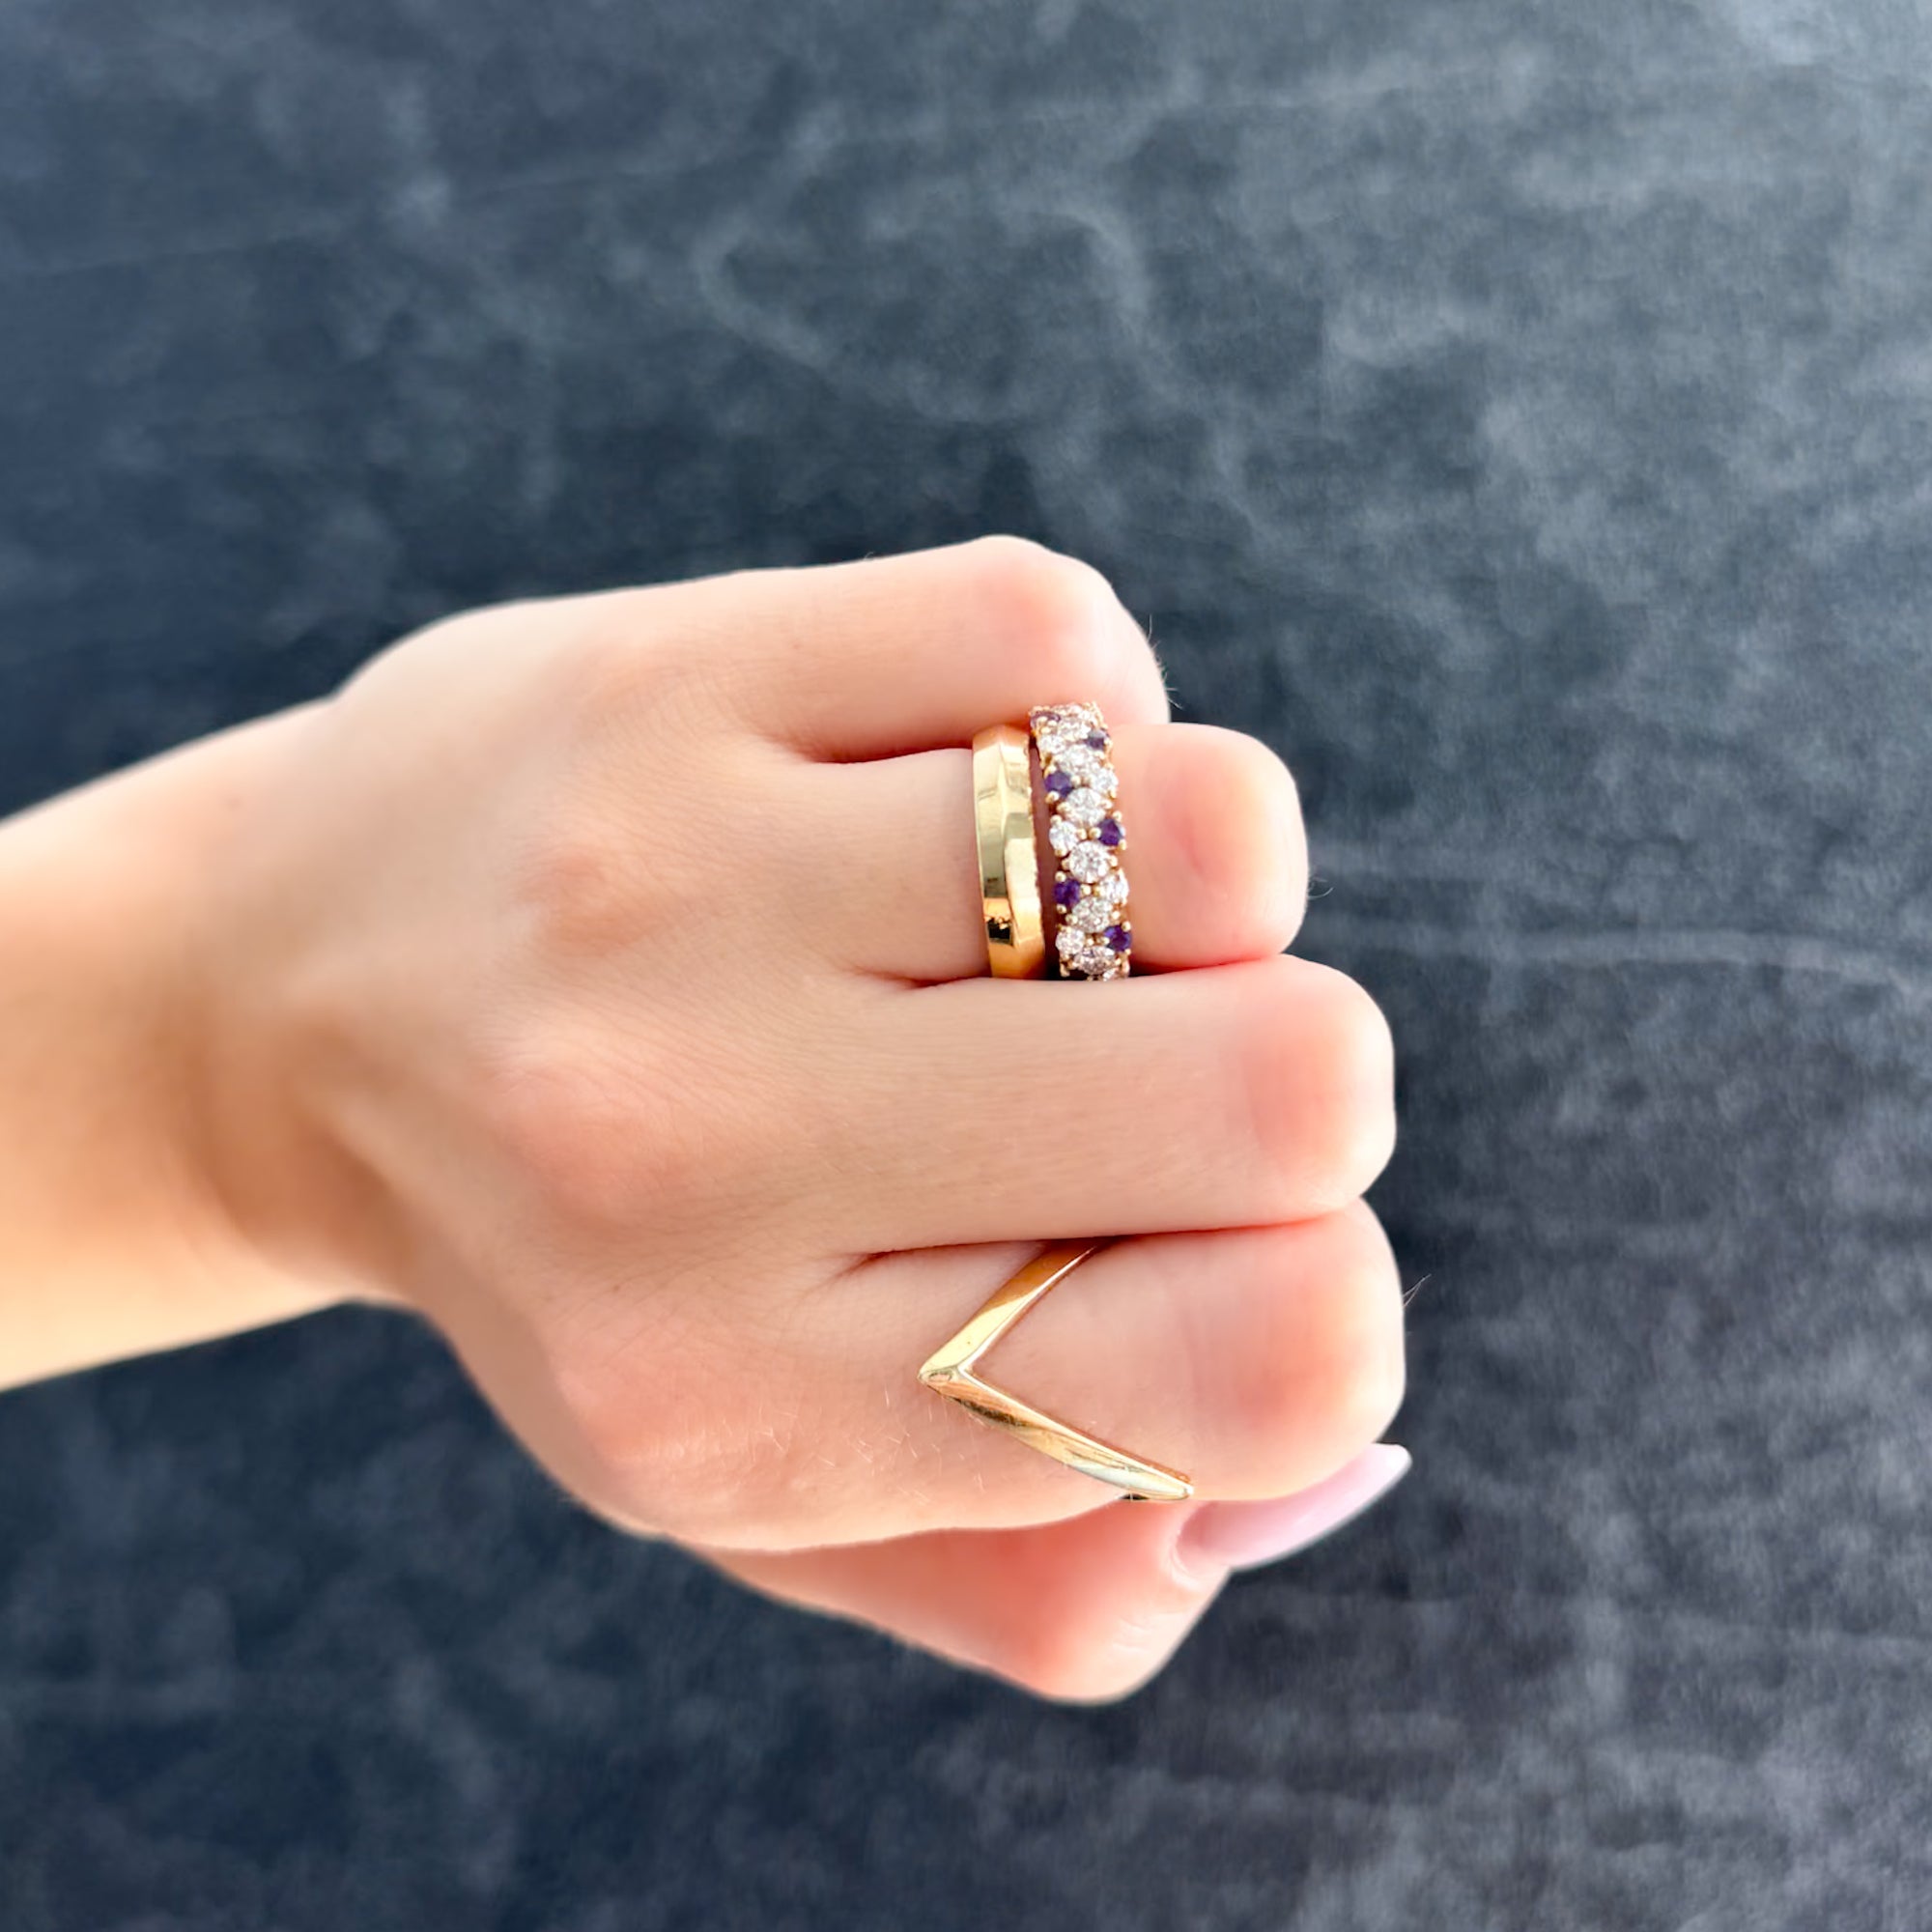 Chevron Band by Good Stone in Yellow Gold